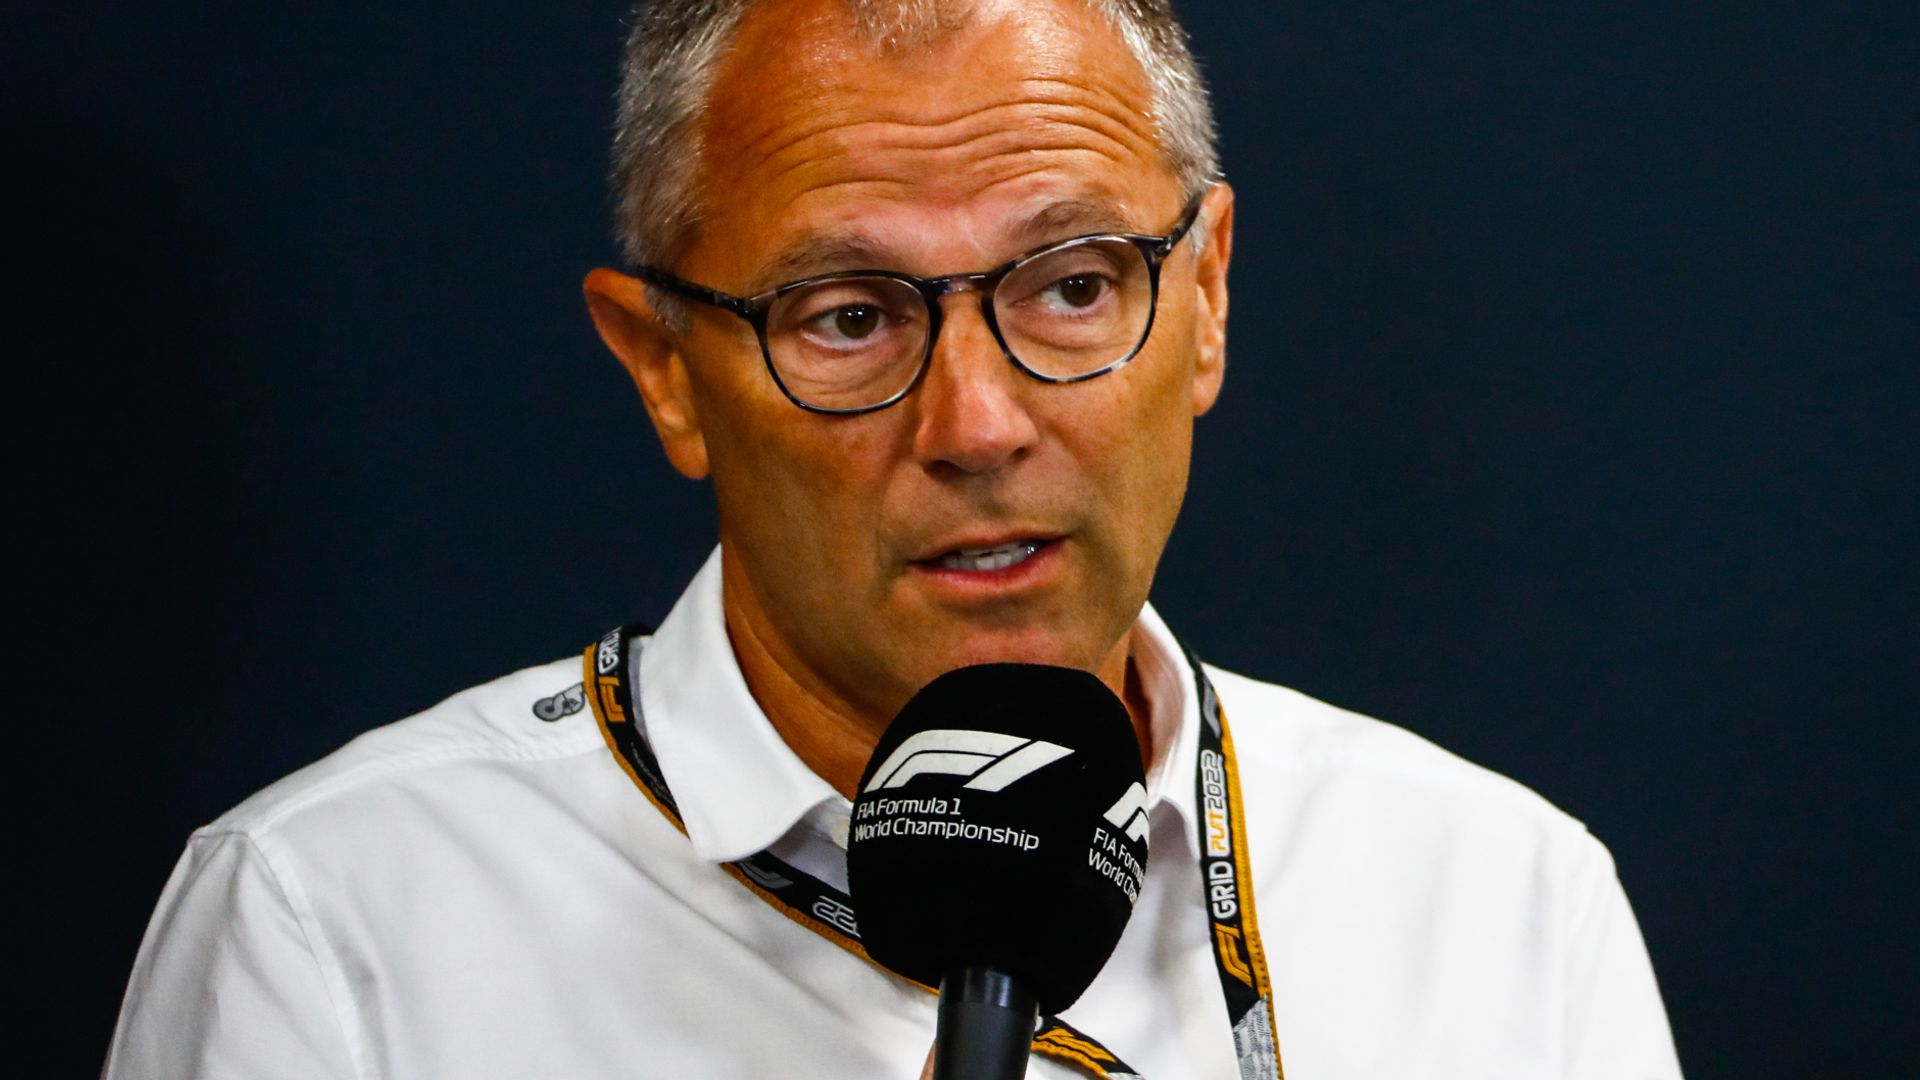 Domenicali: Andretti's vocal F1 tactics 'not smart' | Other teams keen on entry